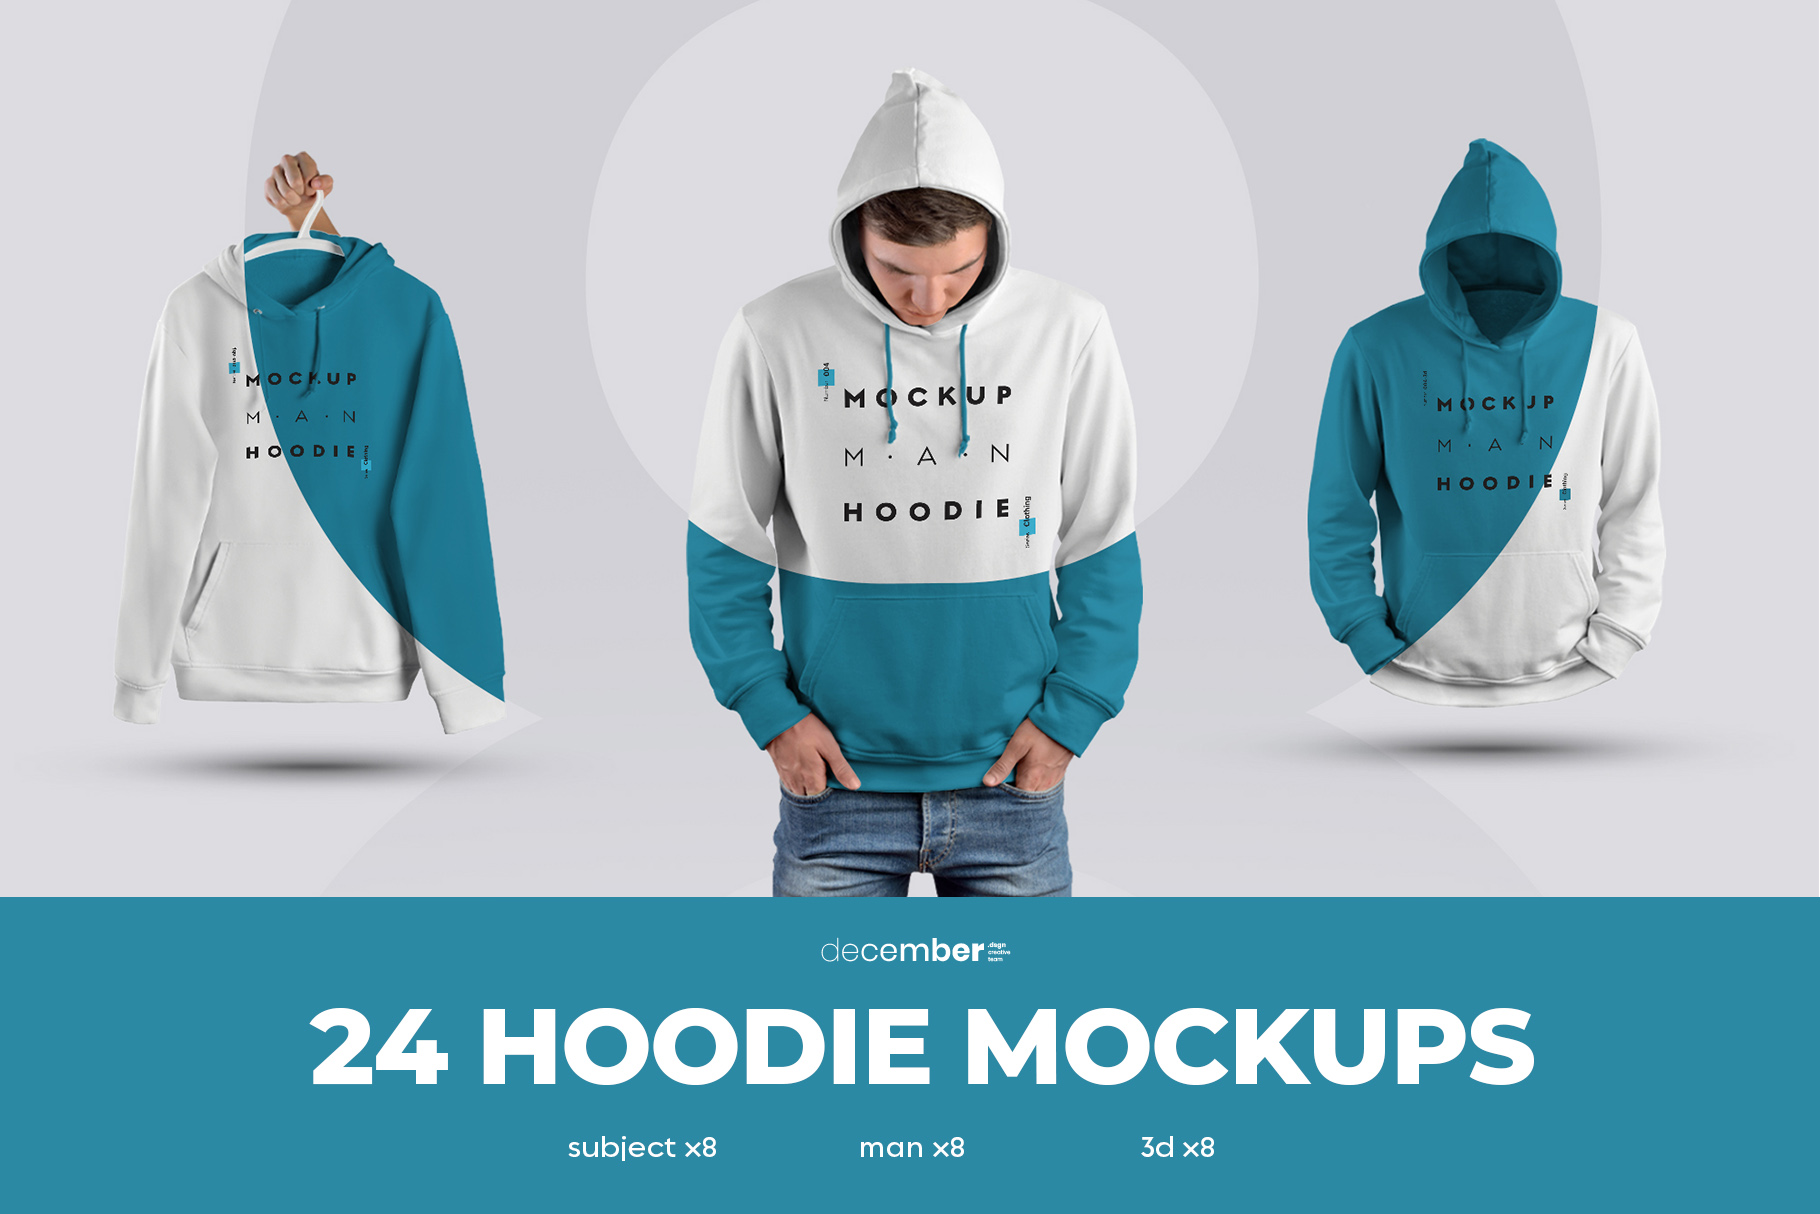 24 Mockups Hoodie on the Man, 3D and Isolated Subjects facebook cover image.